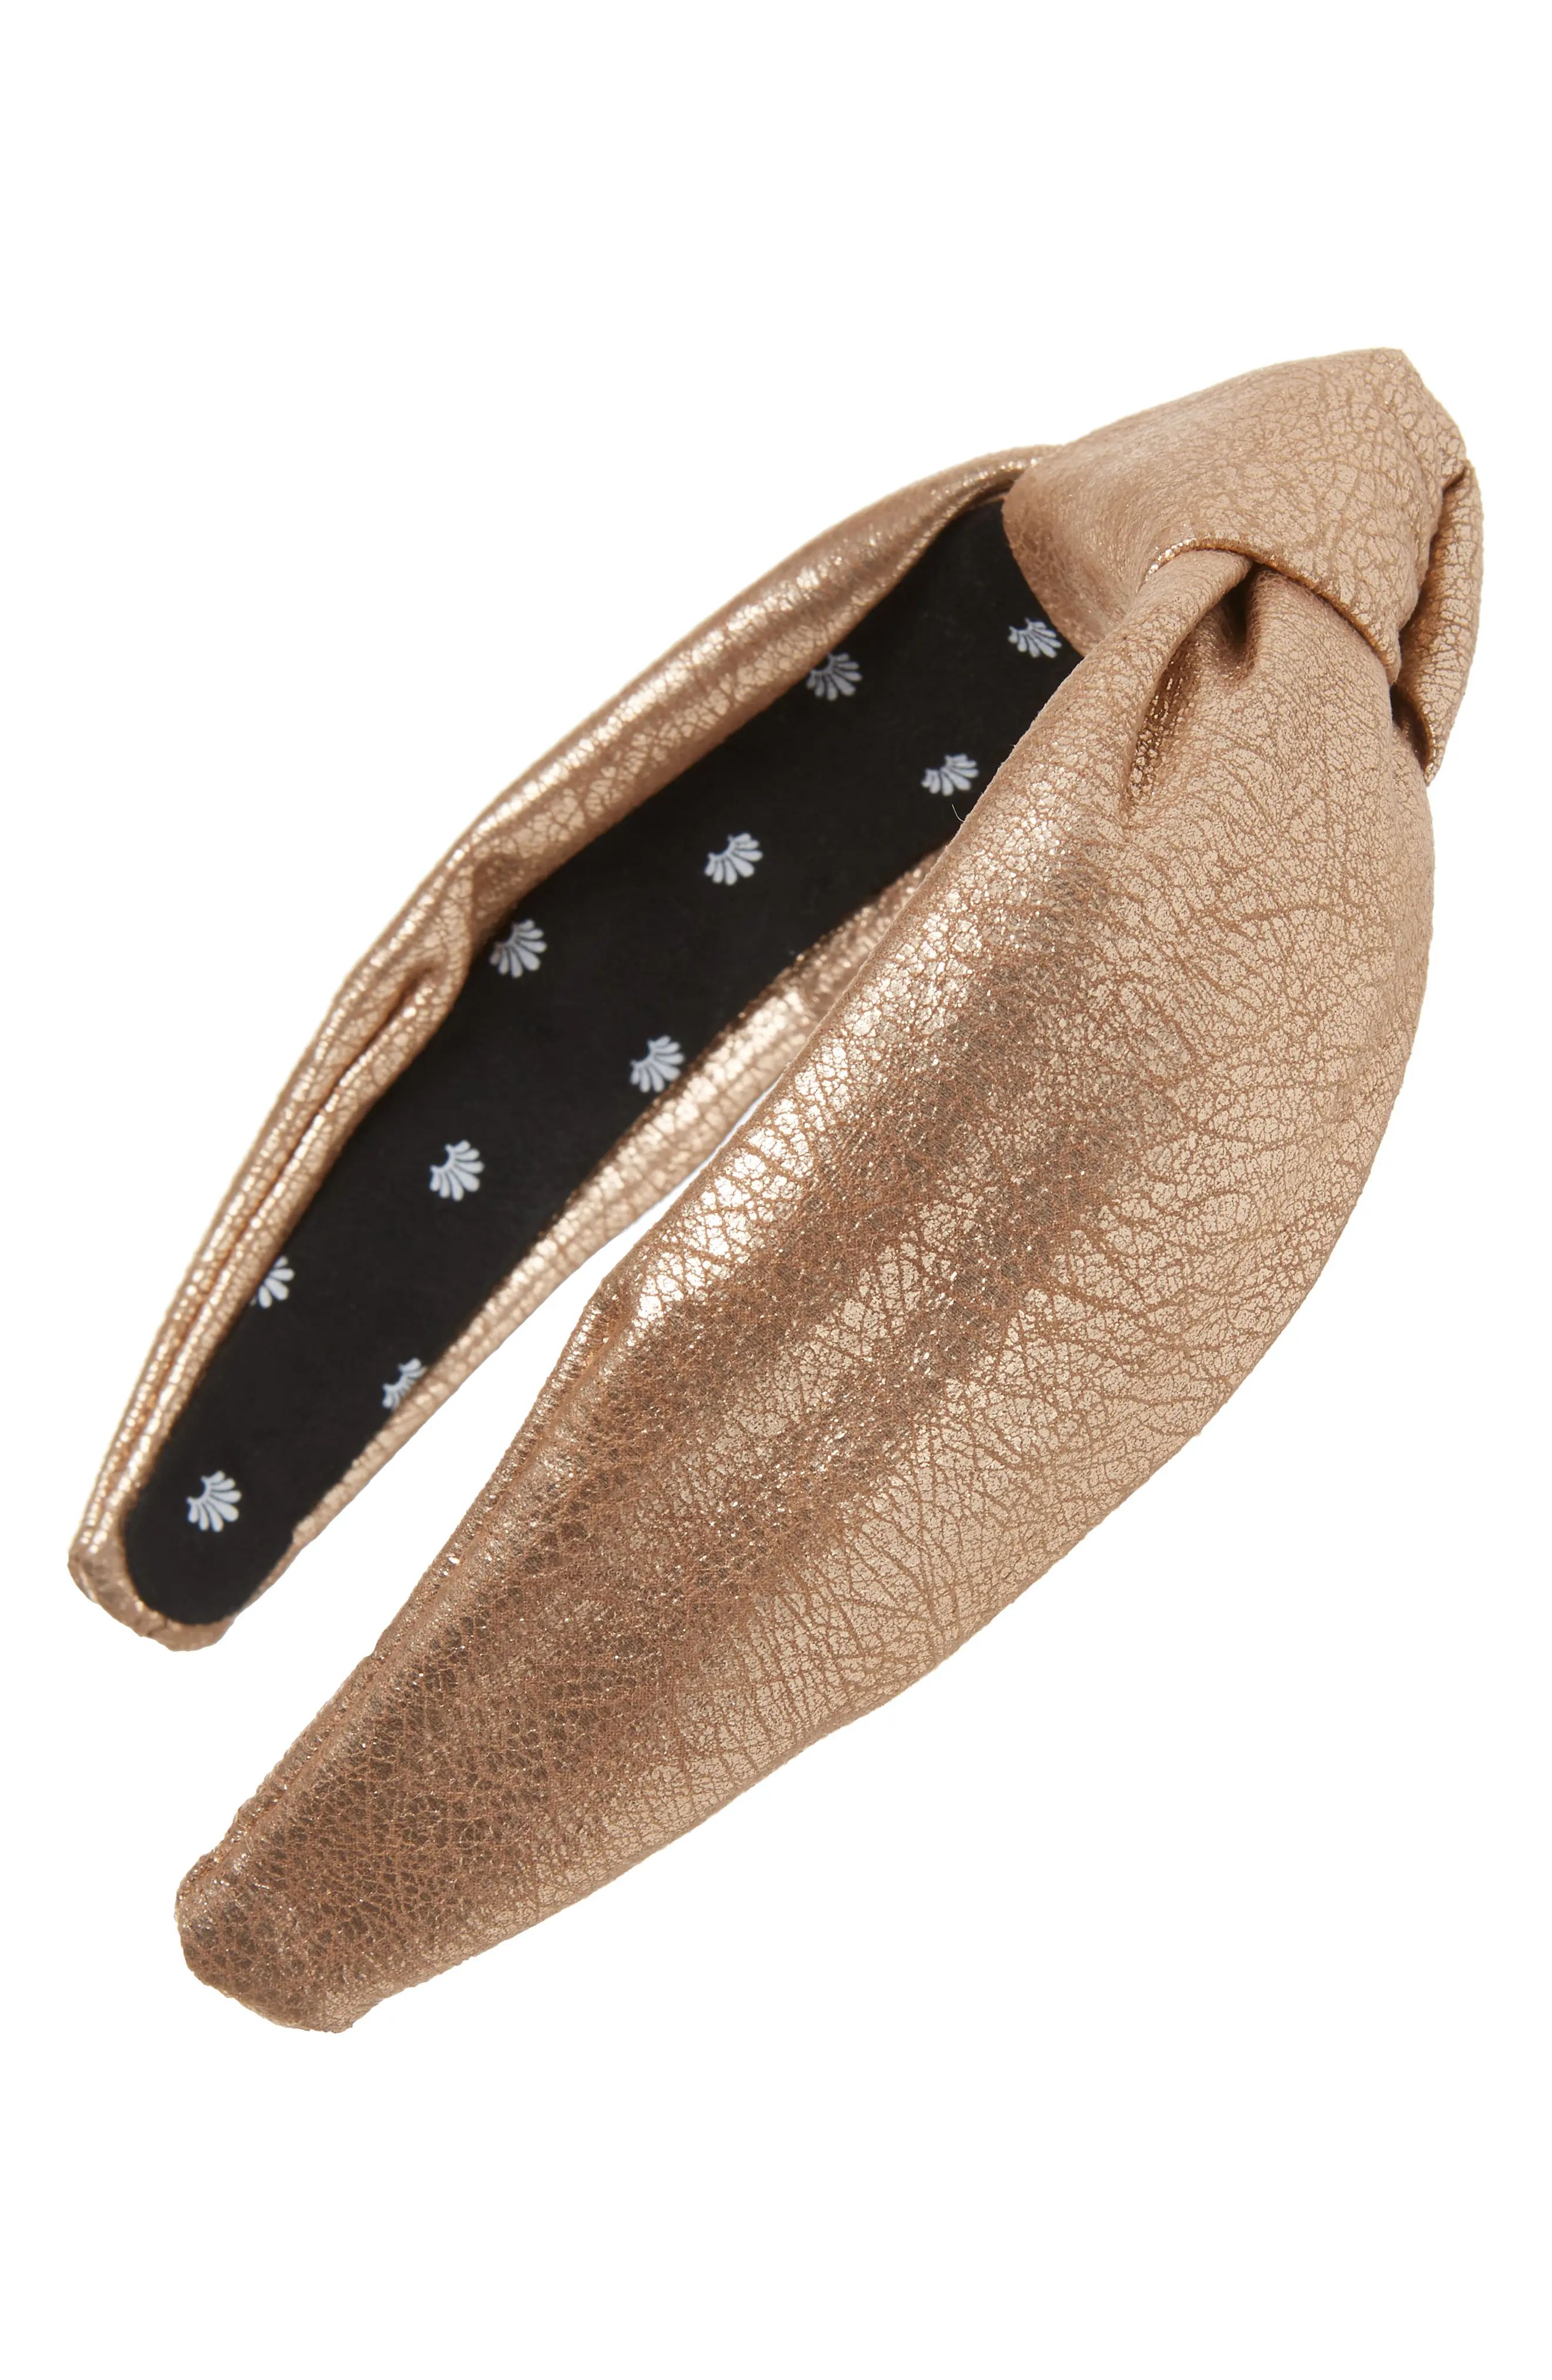 Lele Sadoughi Faux Leather Knotted Headband, Size One Size - Metallic | Nordstrom